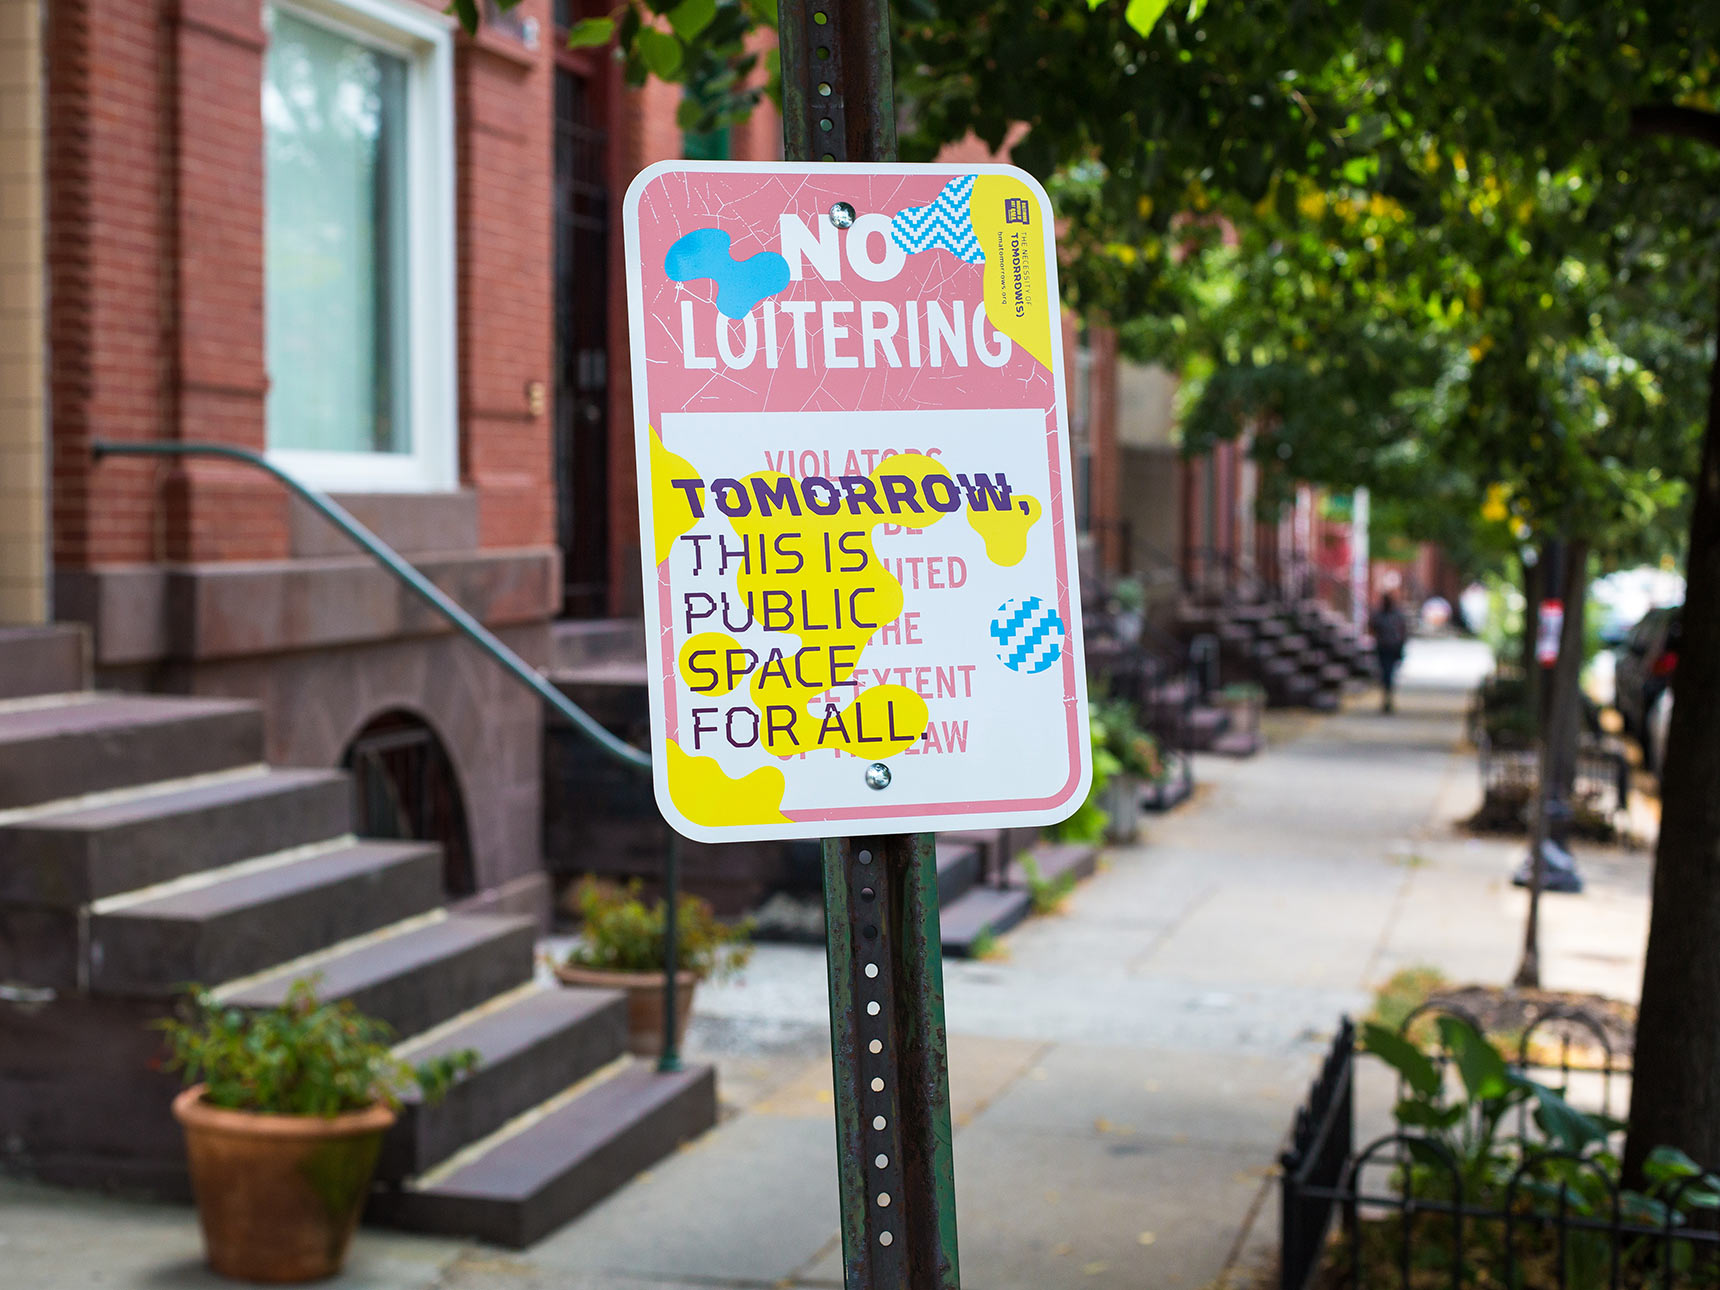 Tomorrow, this is public space for all. A disrupted No Loitering sign public art piece